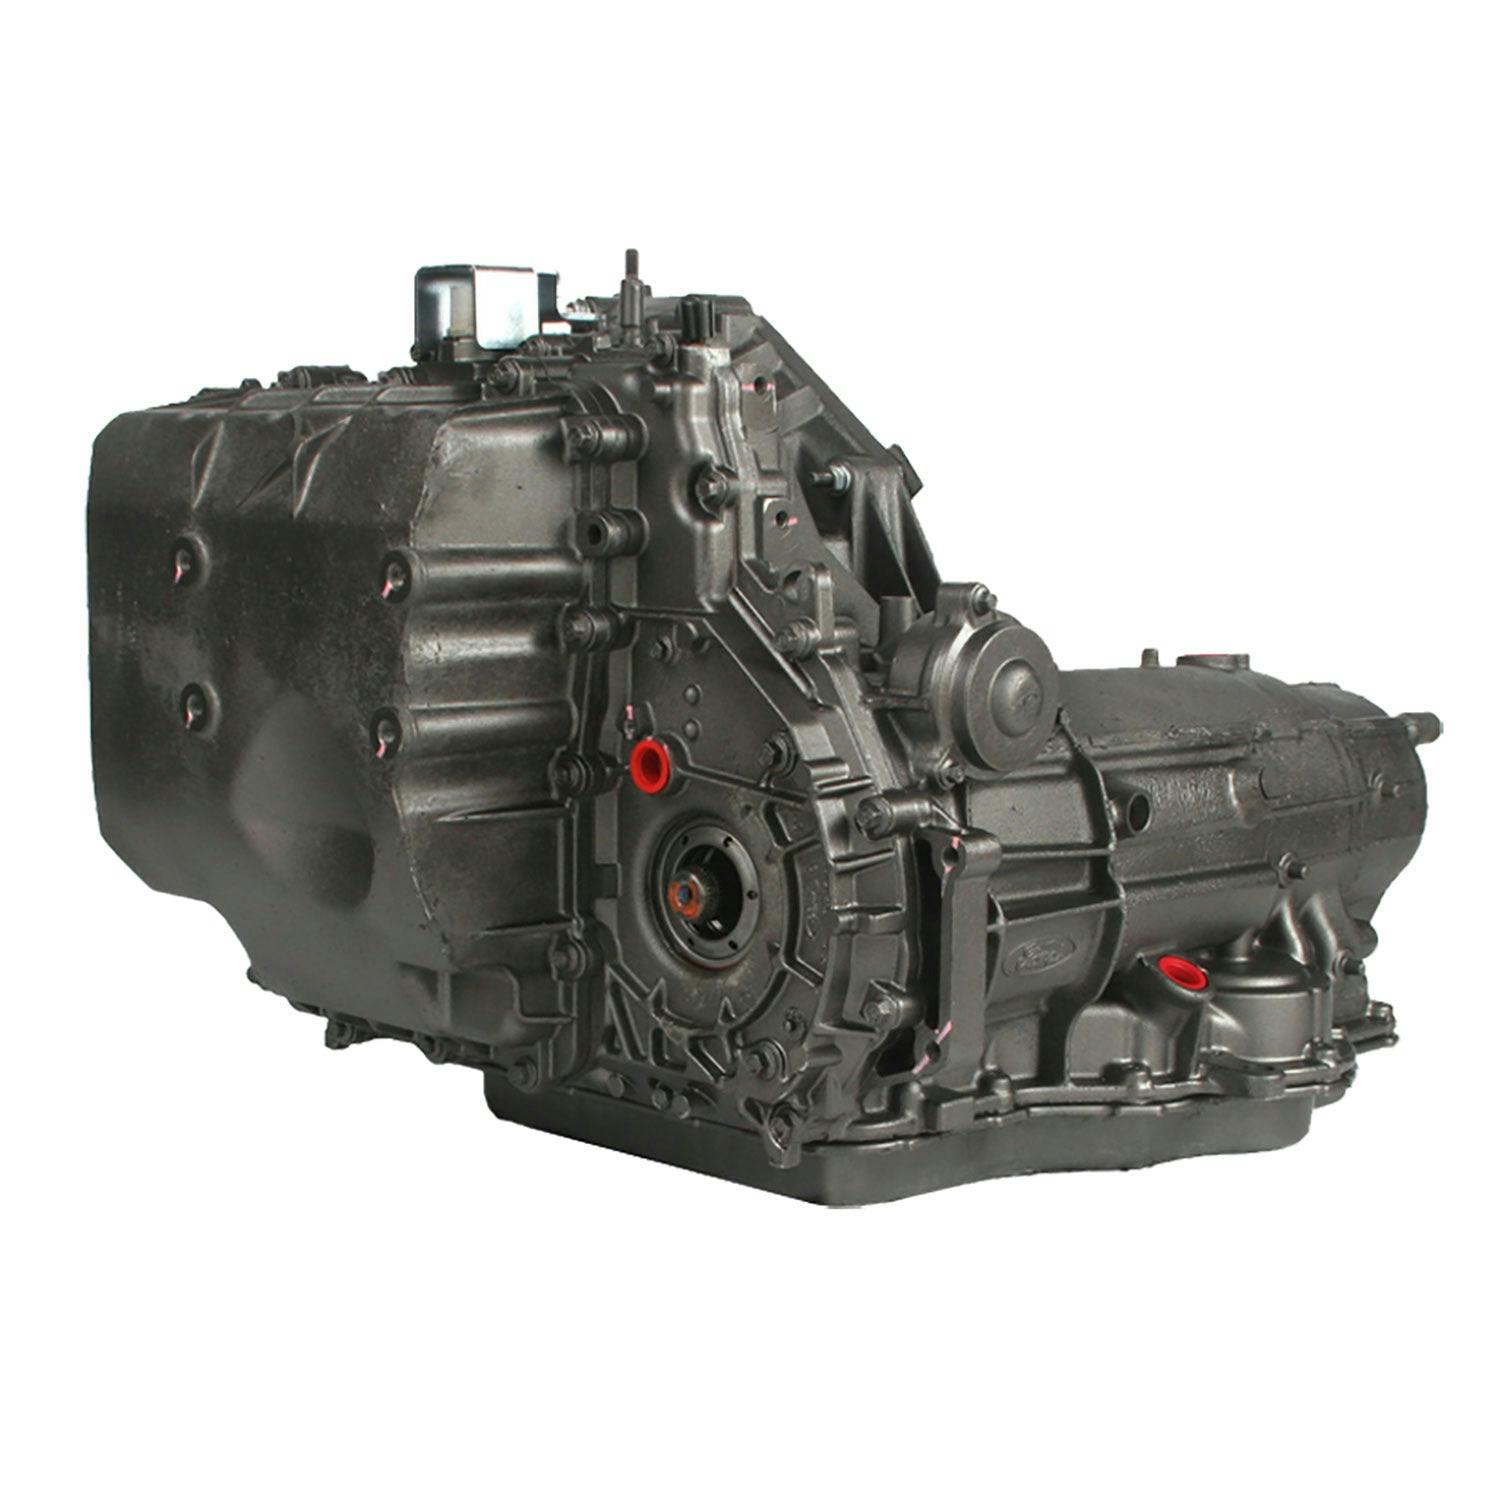 Automatic Transmission for 1999 Ford Taurus FWD with 3.4L V8 Engine